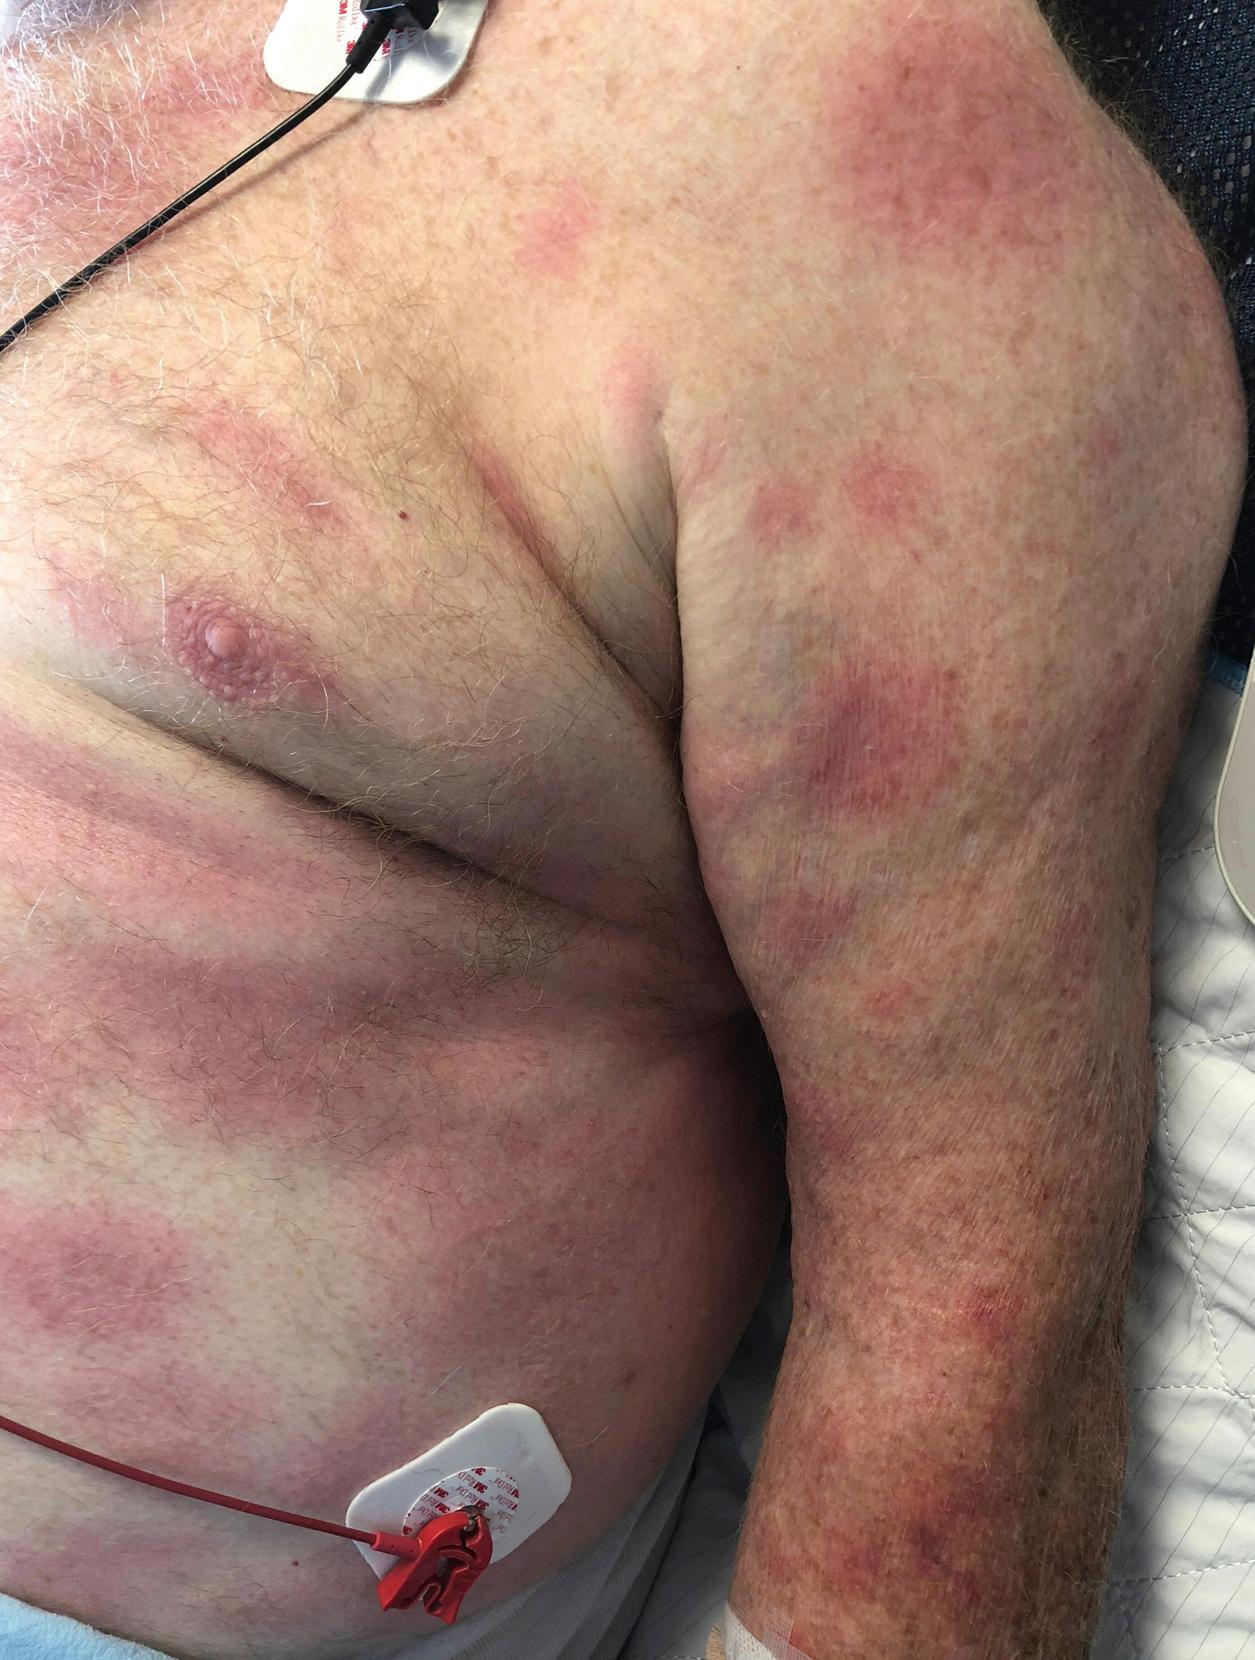 Fig. 15.1, Disseminated erythema migrans involving the trunk.